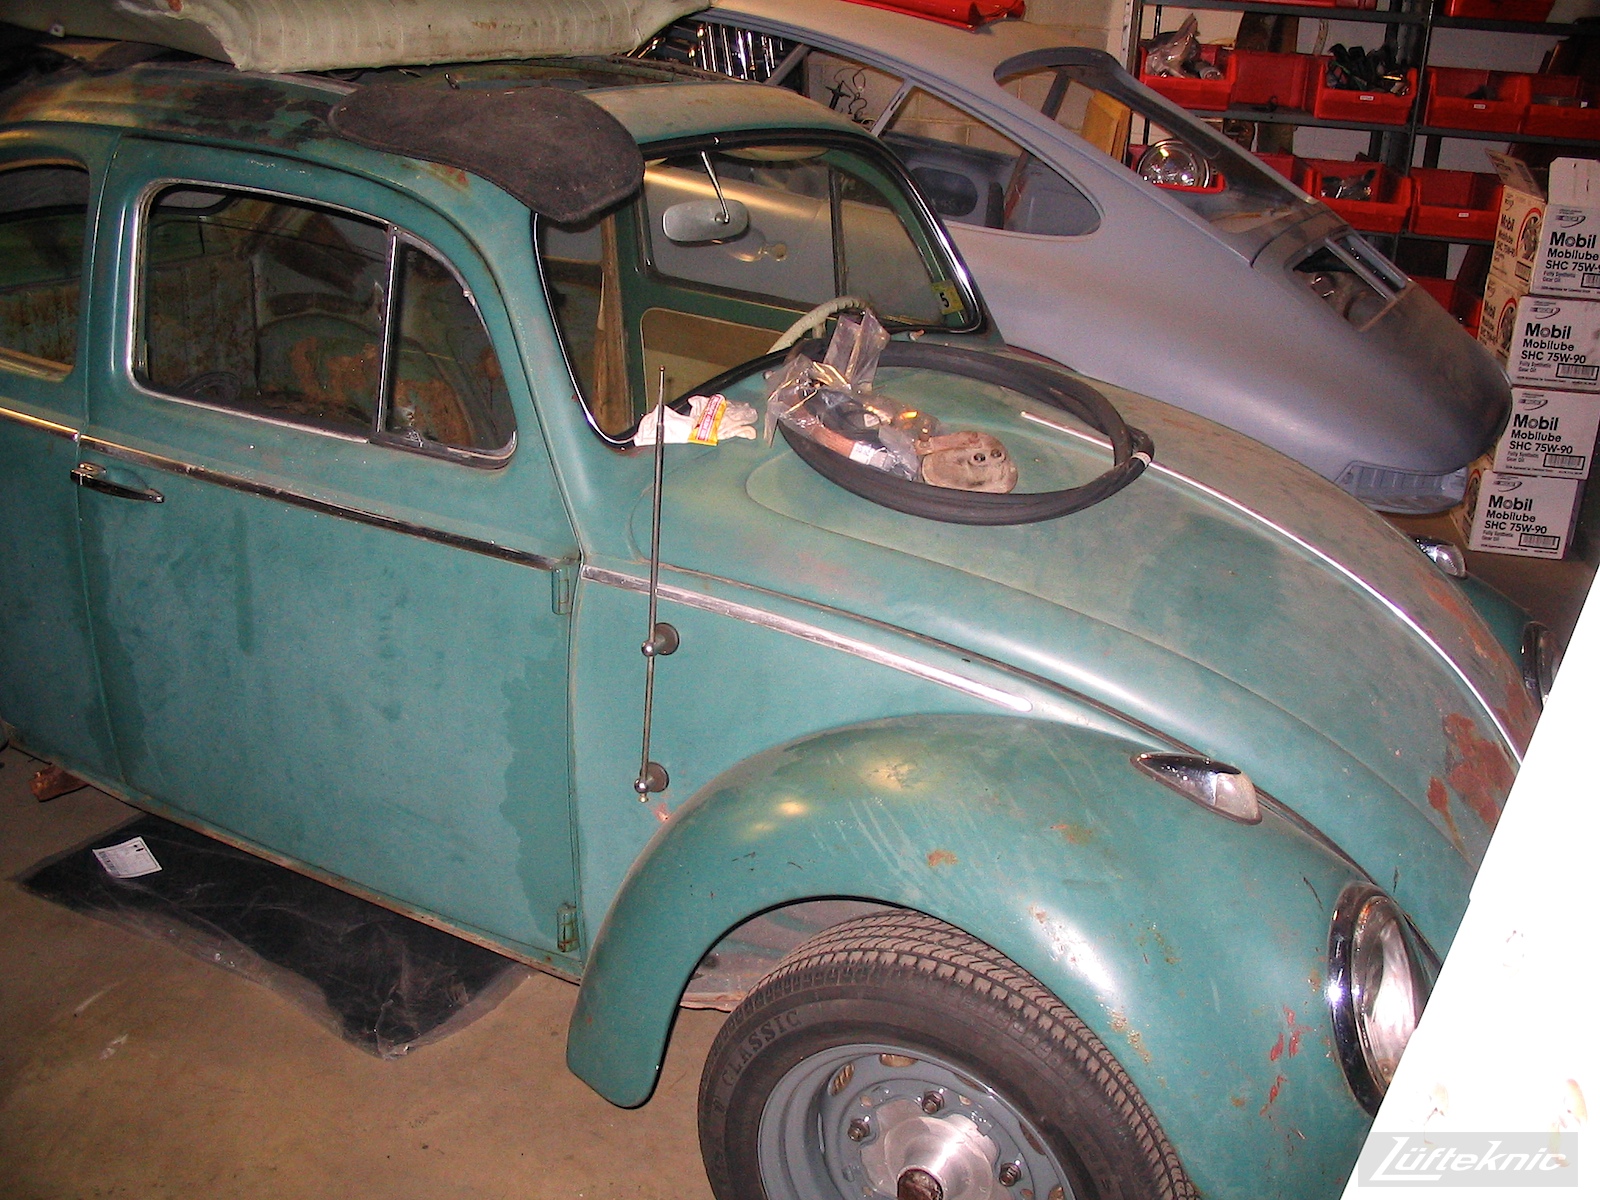 All original 1960 Beetle with a Porsche 356 engine and brakes.